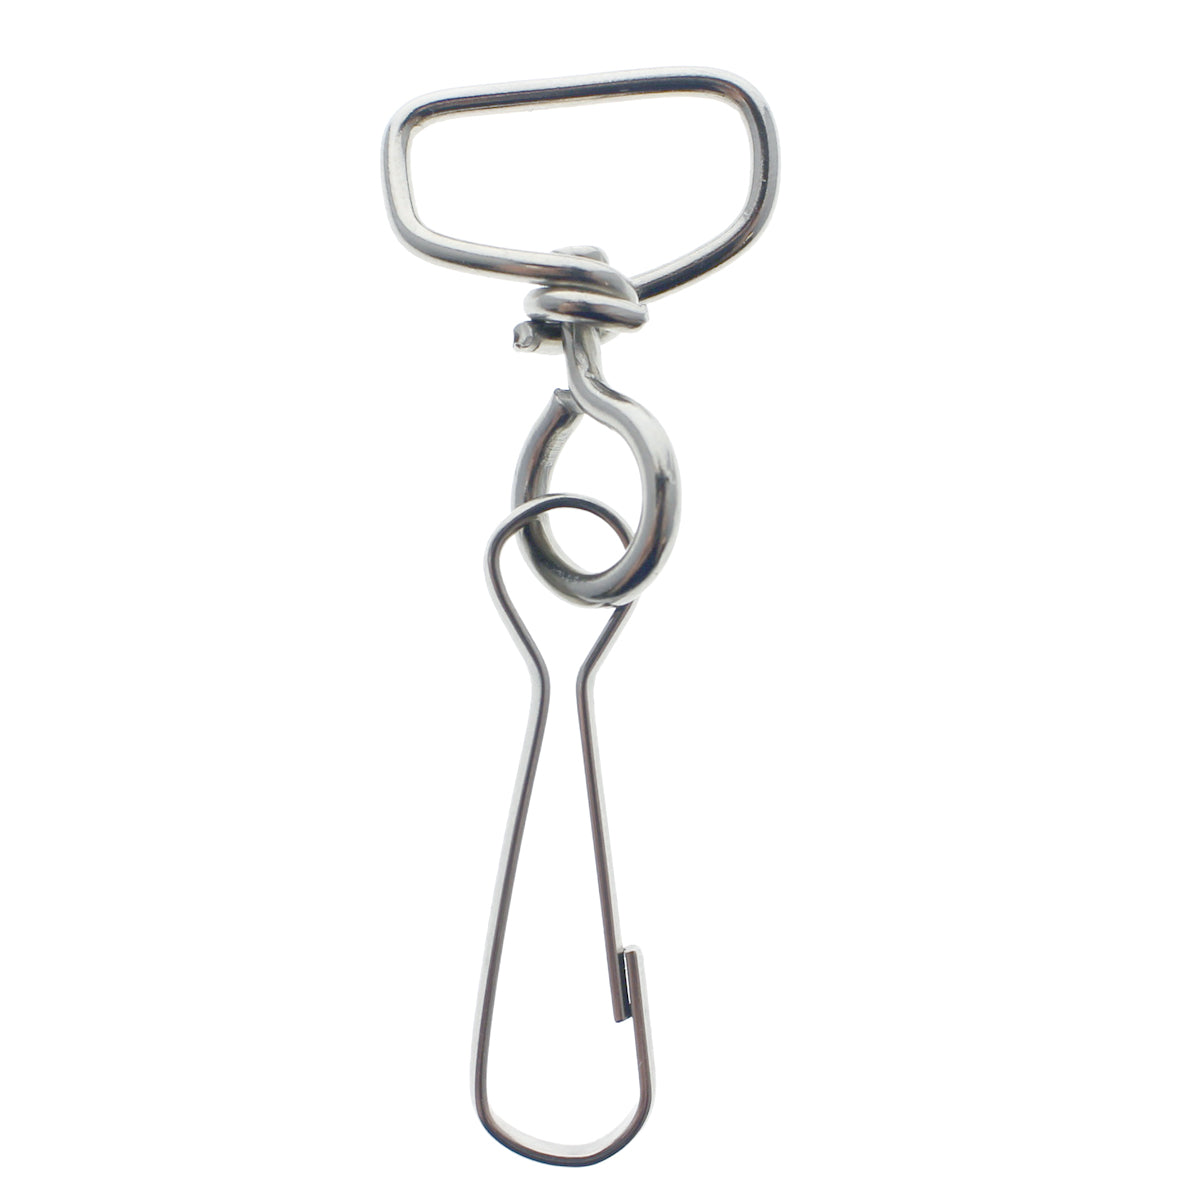 Swivel metal J hook clasp with smooth, wide 3/4"D ring for Lanyard and Craft Making Accessories